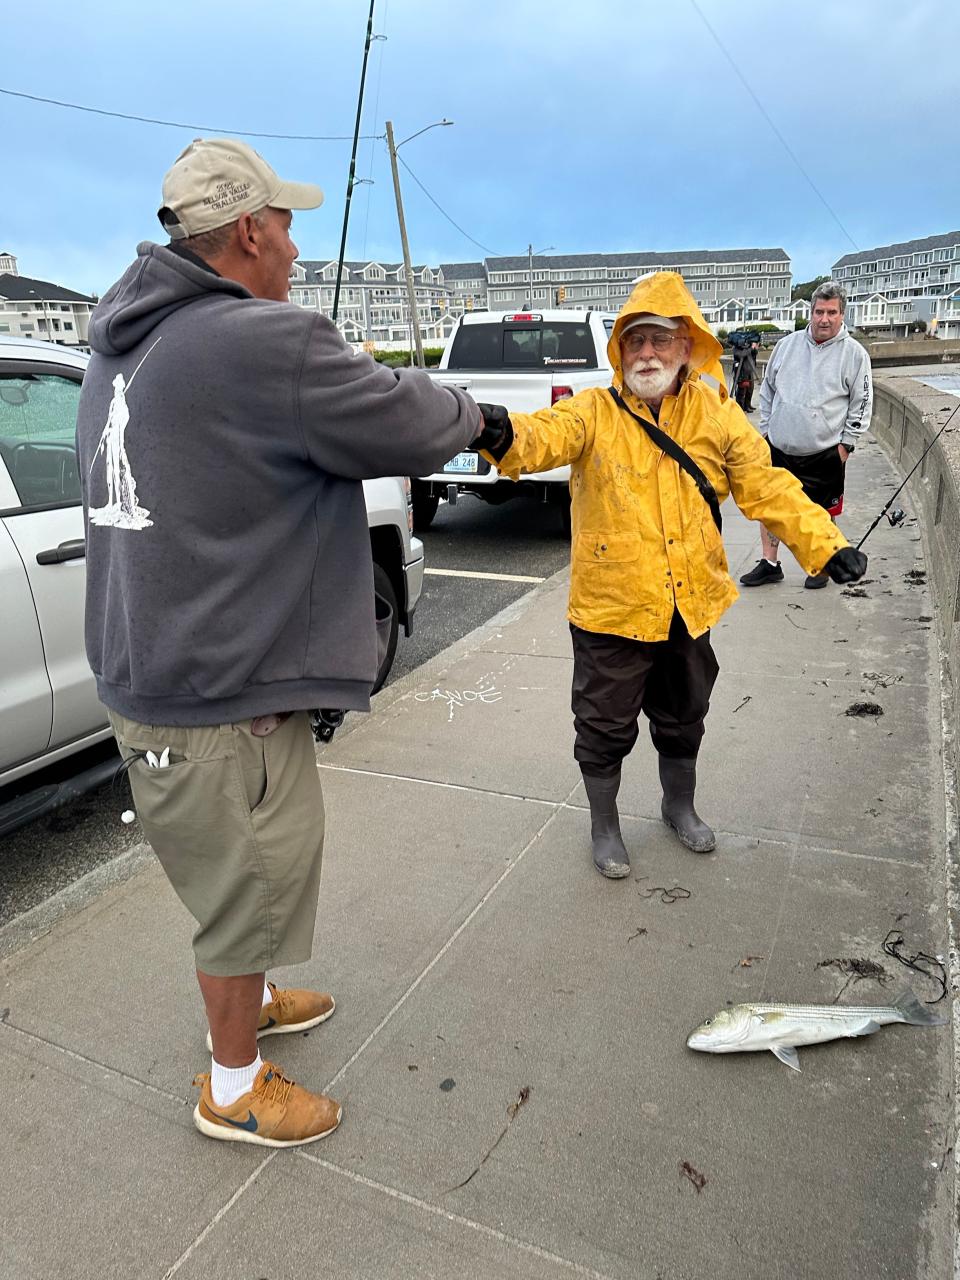 David “Hard Tail” Taylor, left, gets a fist-bump from fellow fisherman Robert Shaw after hauling in a striped bass over the wall at Narragansett Town Beach as Hurricane Lee passed by on Saturday morning.